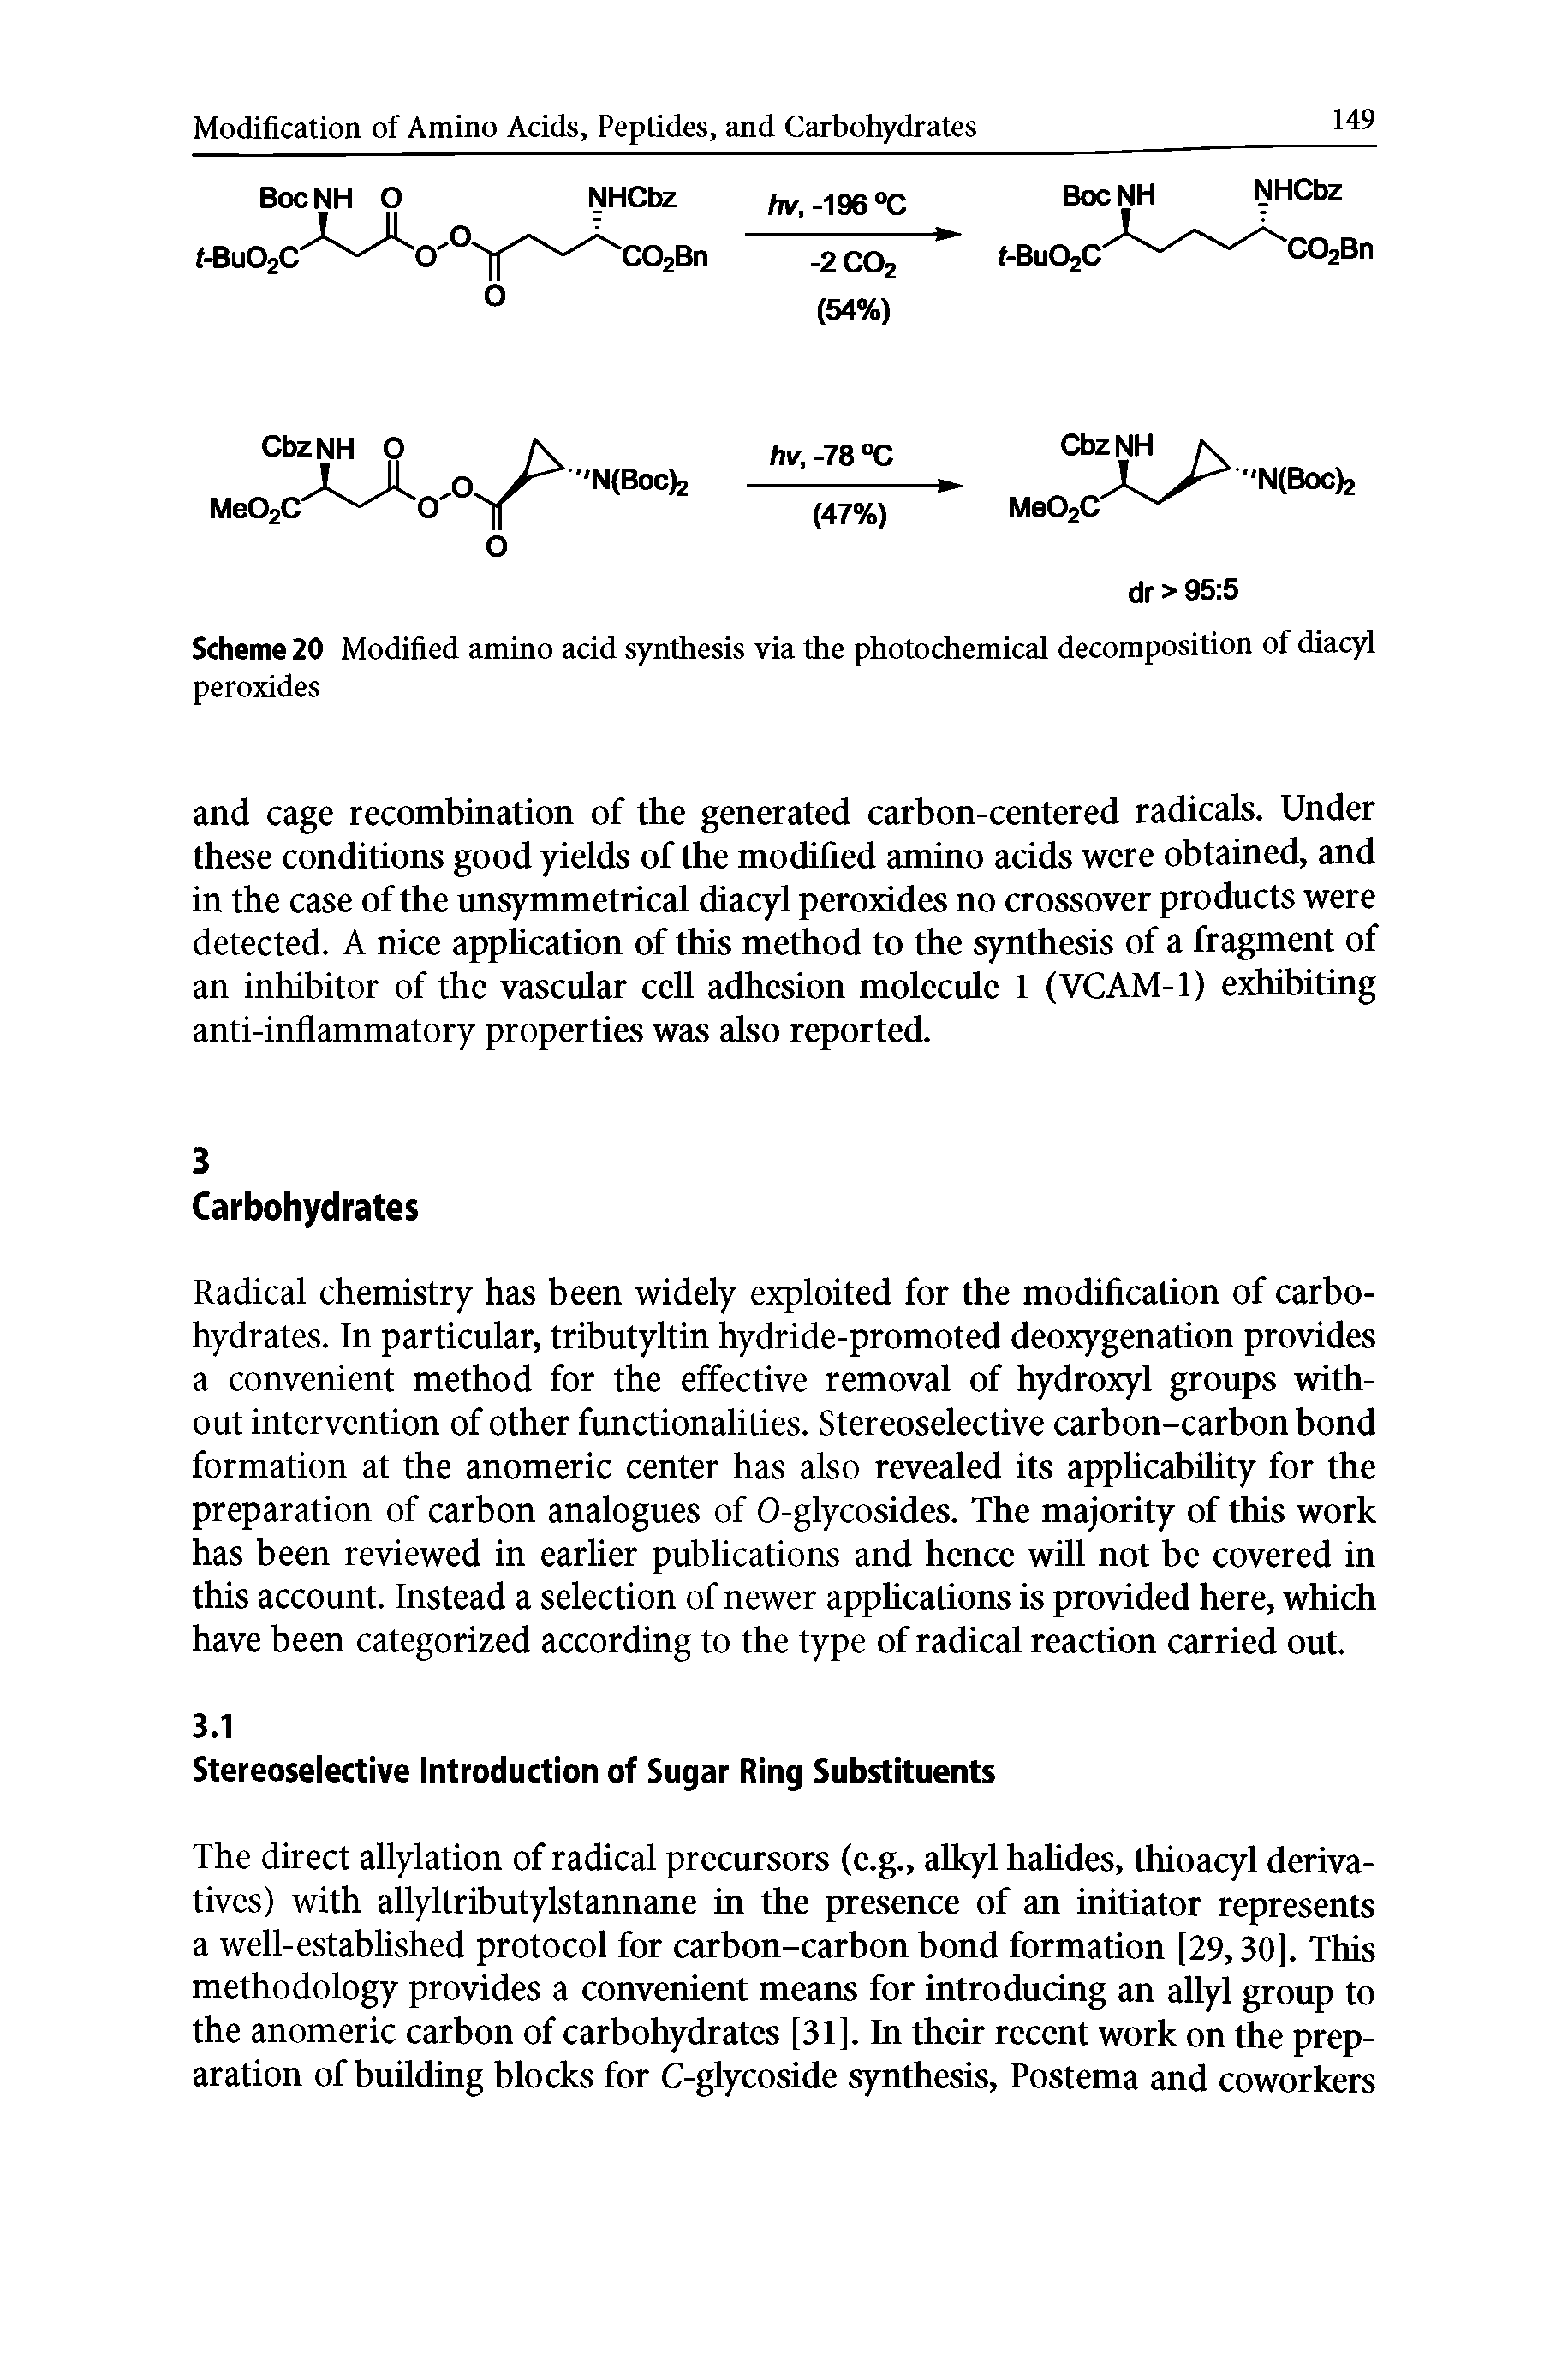 Scheme 20 Modified amino acid synthesis via the photochemical decomposition of diacyl peroxides...